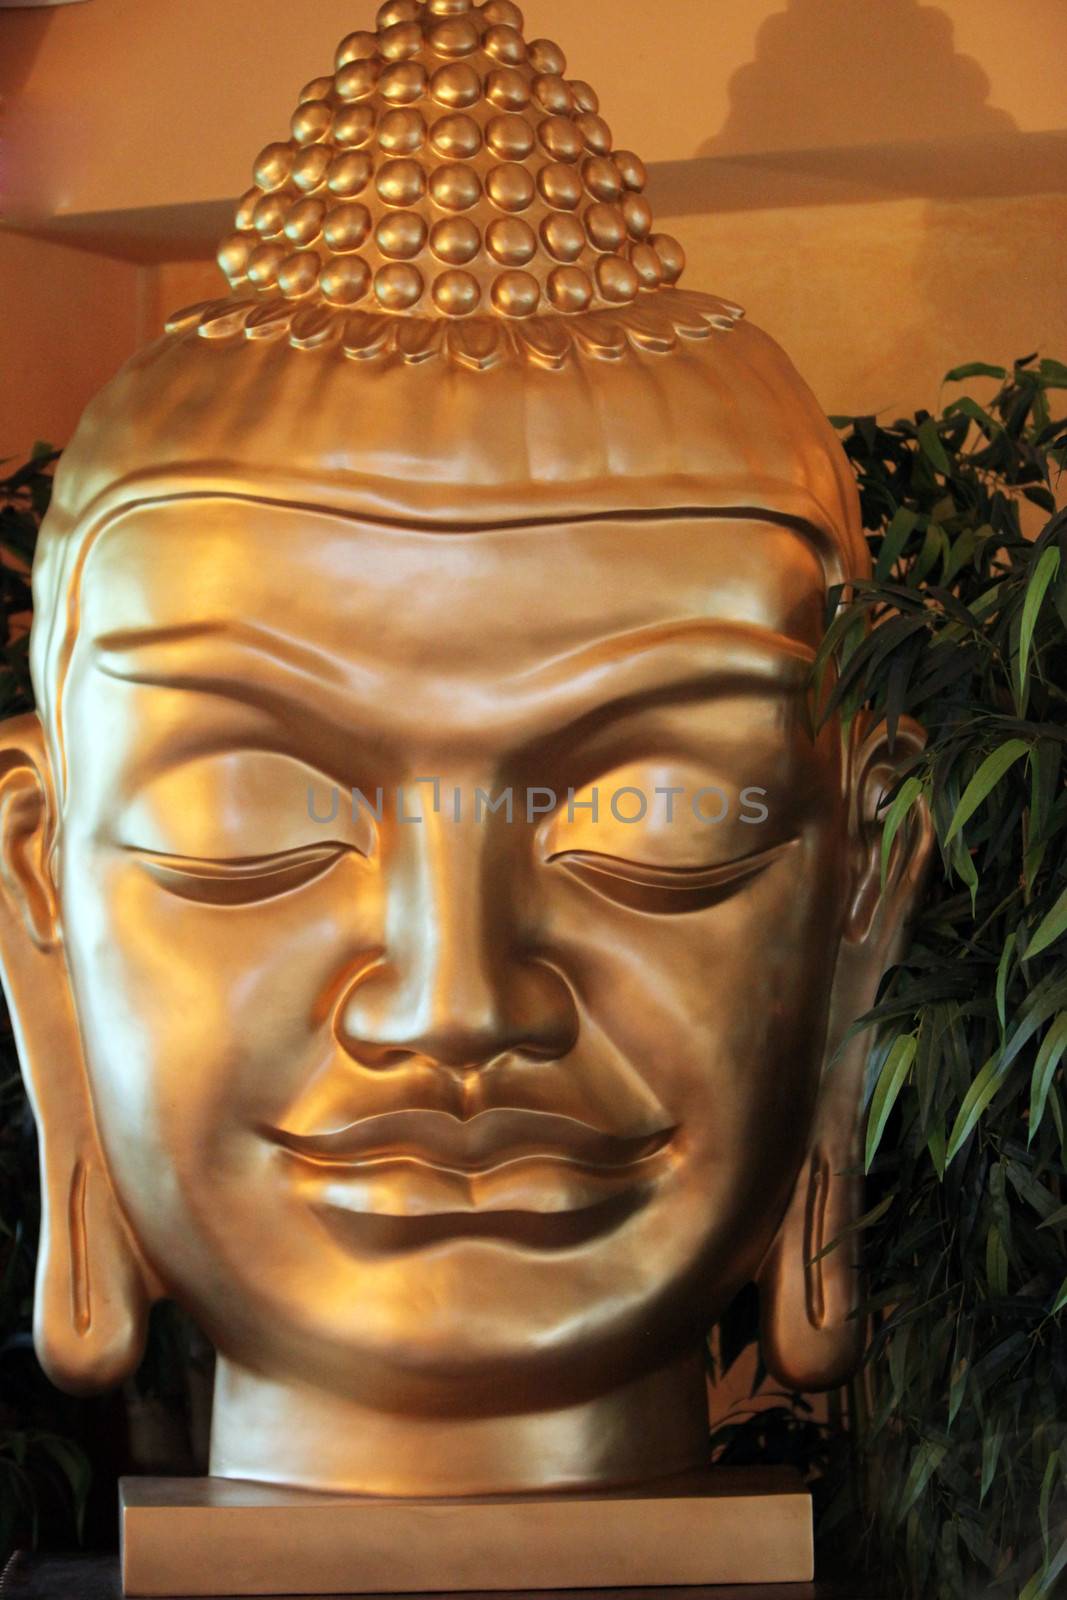 Bronzed face of a Buddha statue with a serene expression and eyes closed in meditation